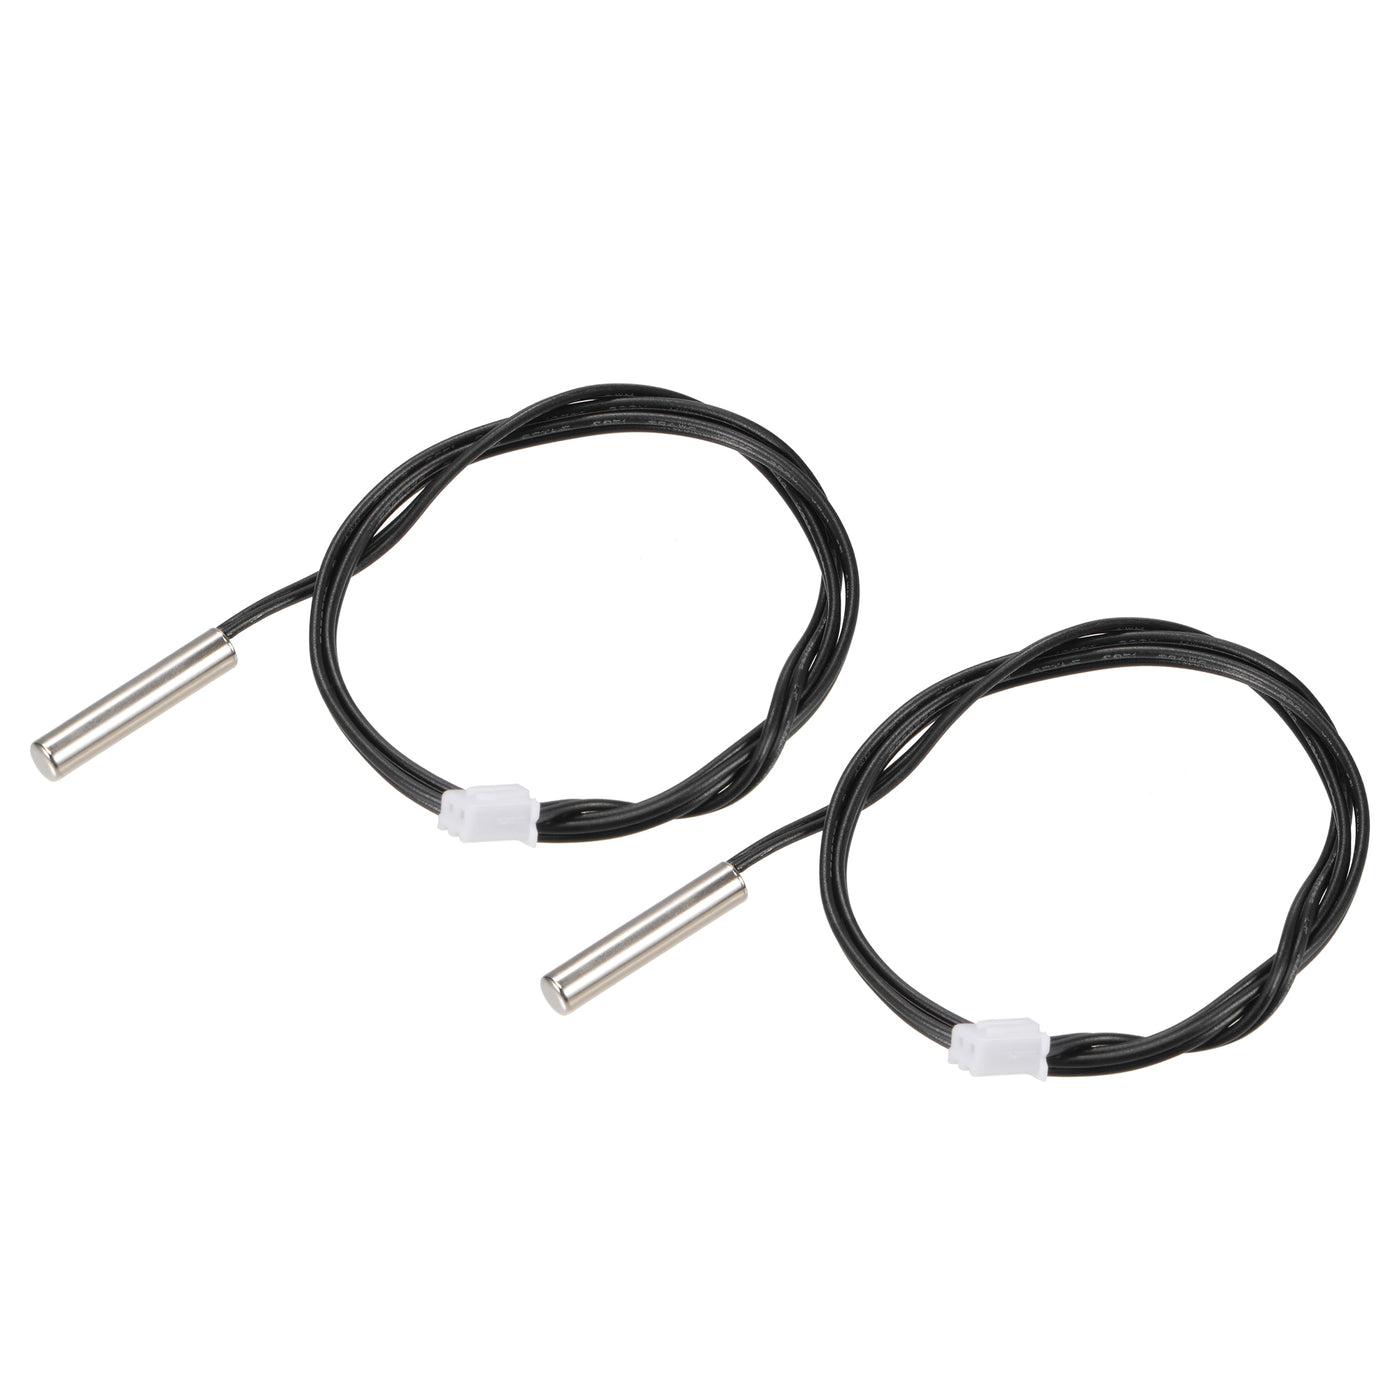 uxcell Uxcell 2pcs 5K Temperature Sensor Probe, Stainless Steel NTC Thermal Sensor Probe 50cm Digital Thermometer Extension Cable